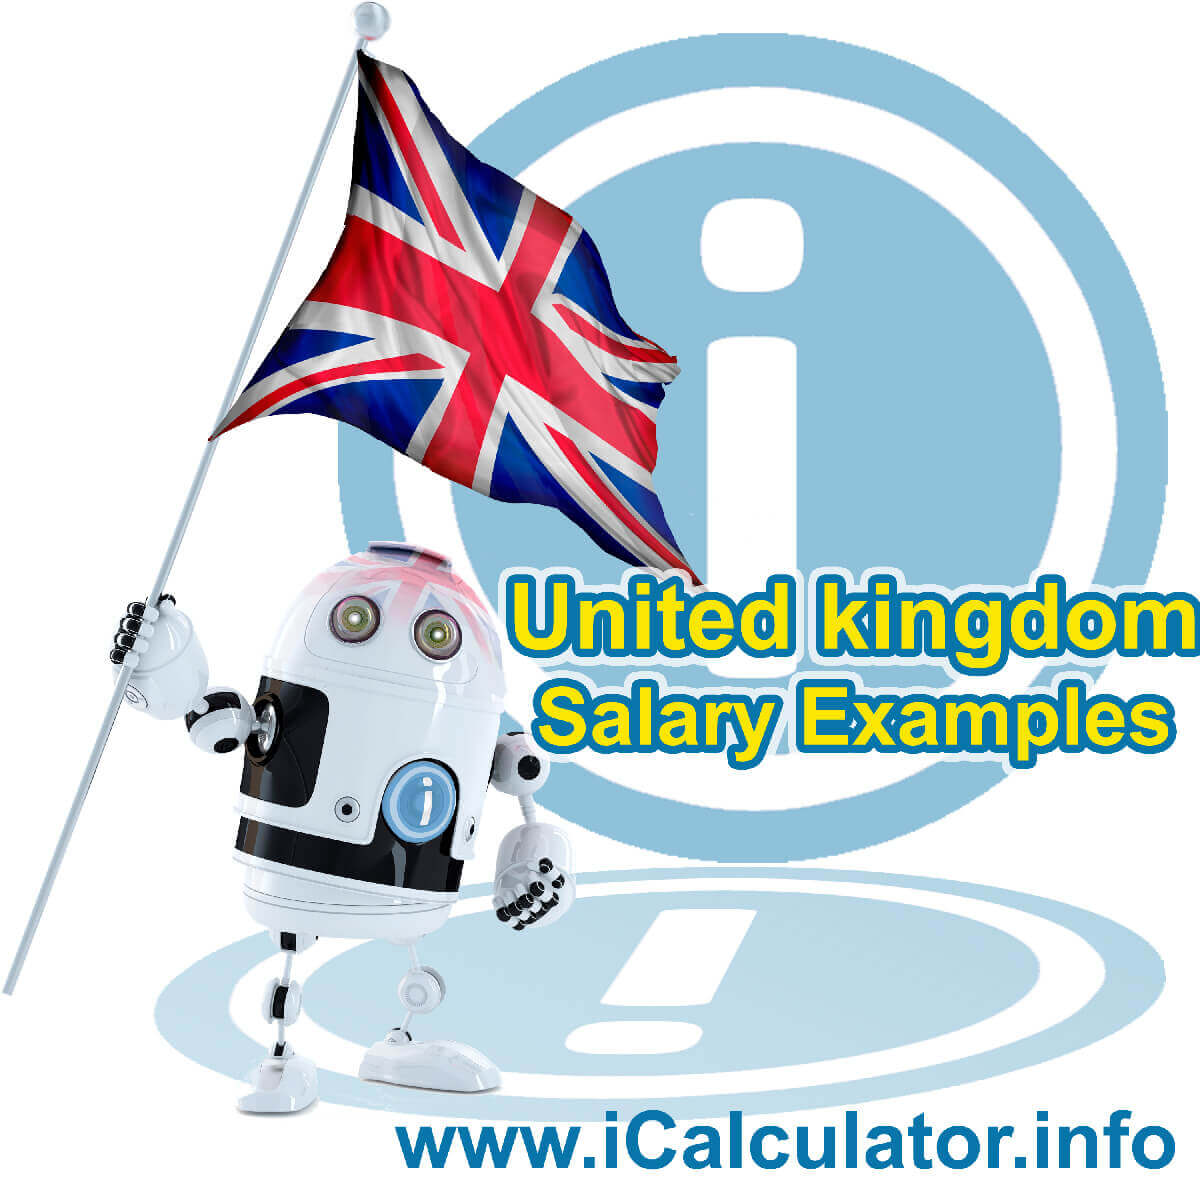 UK Salary Examples. This image shows the United Kingdom flag and information relating to the tax formula used to calculate the UK Salary Examples